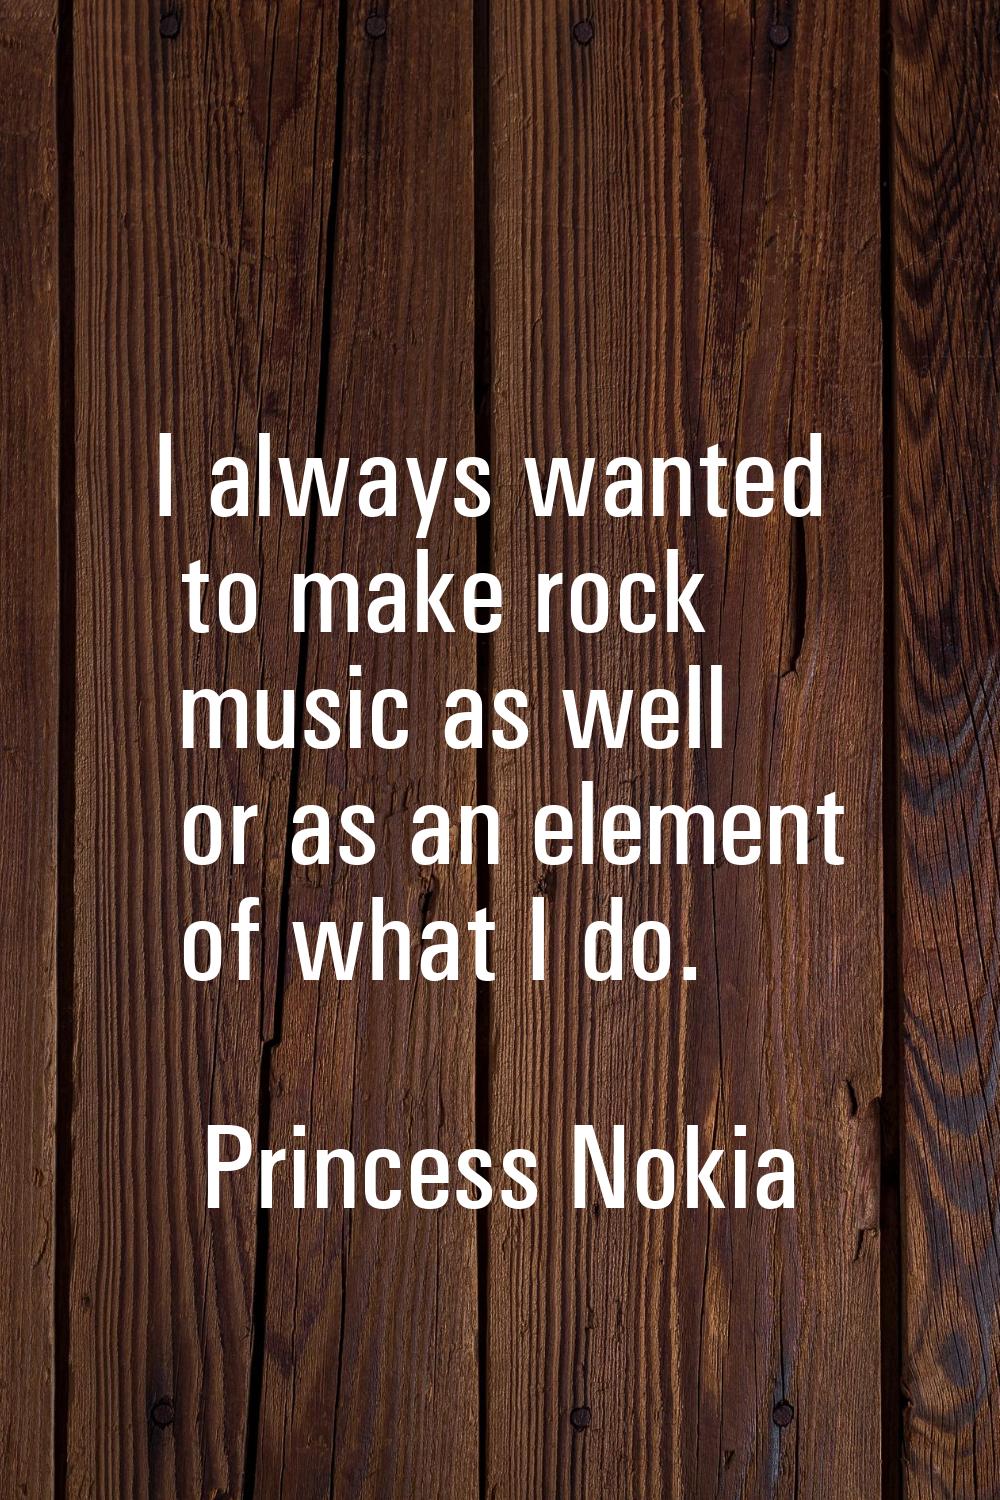 I always wanted to make rock music as well or as an element of what I do.